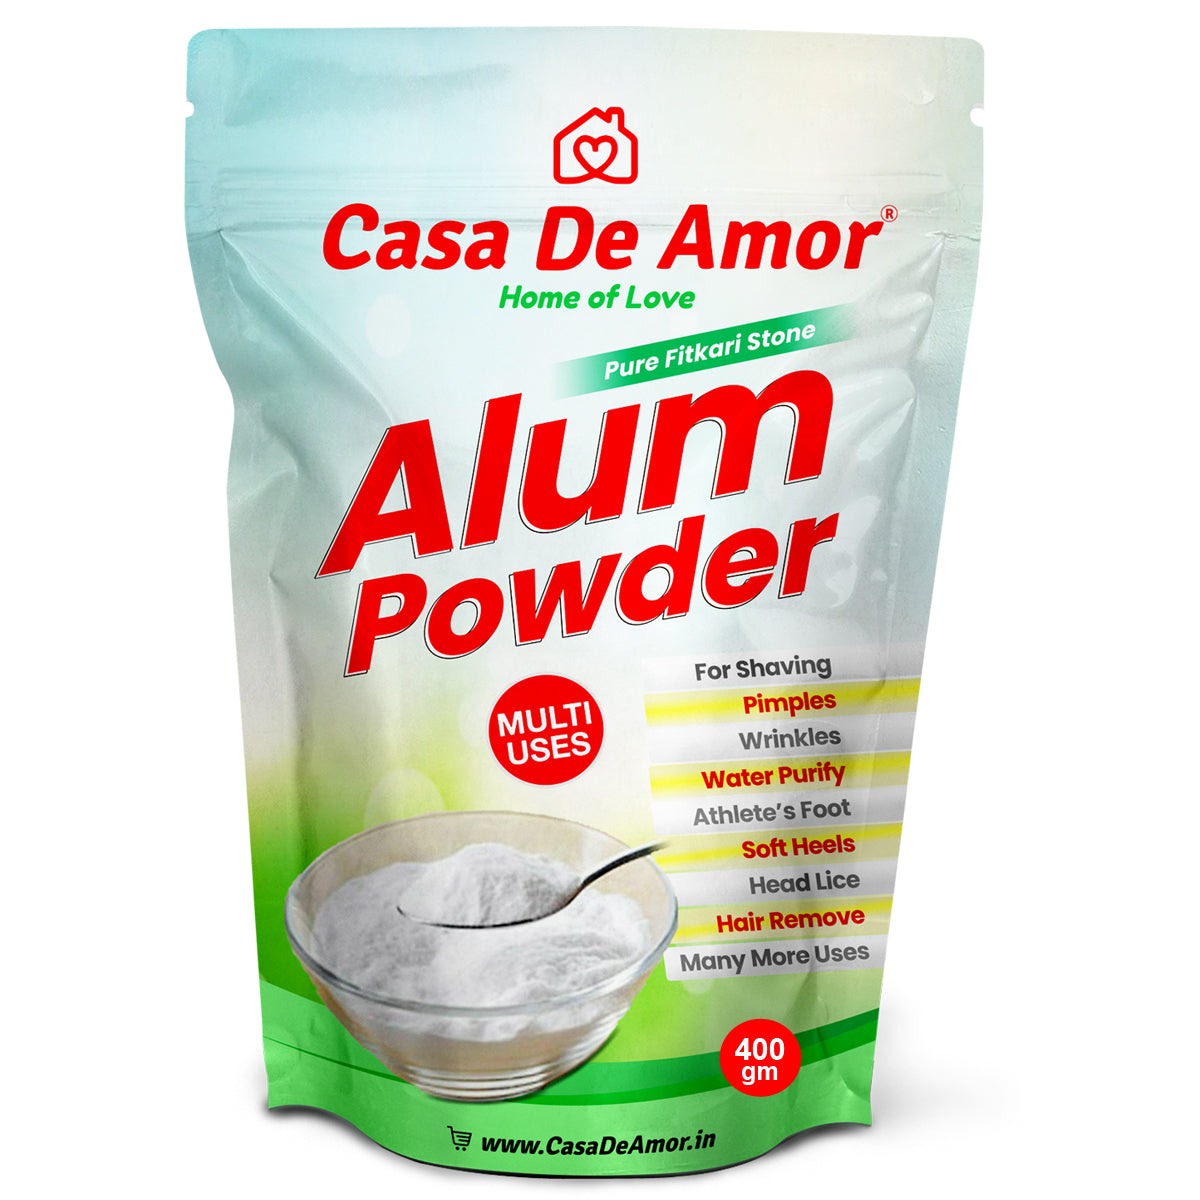 Casa De Amor® Fitkari (Phitkari) Alum Stone Powder for Water Purification, Skin Care, After Shave, Deodrant Facial Hair Removal, Canker Sores, Skin Tightening & Many More Uses